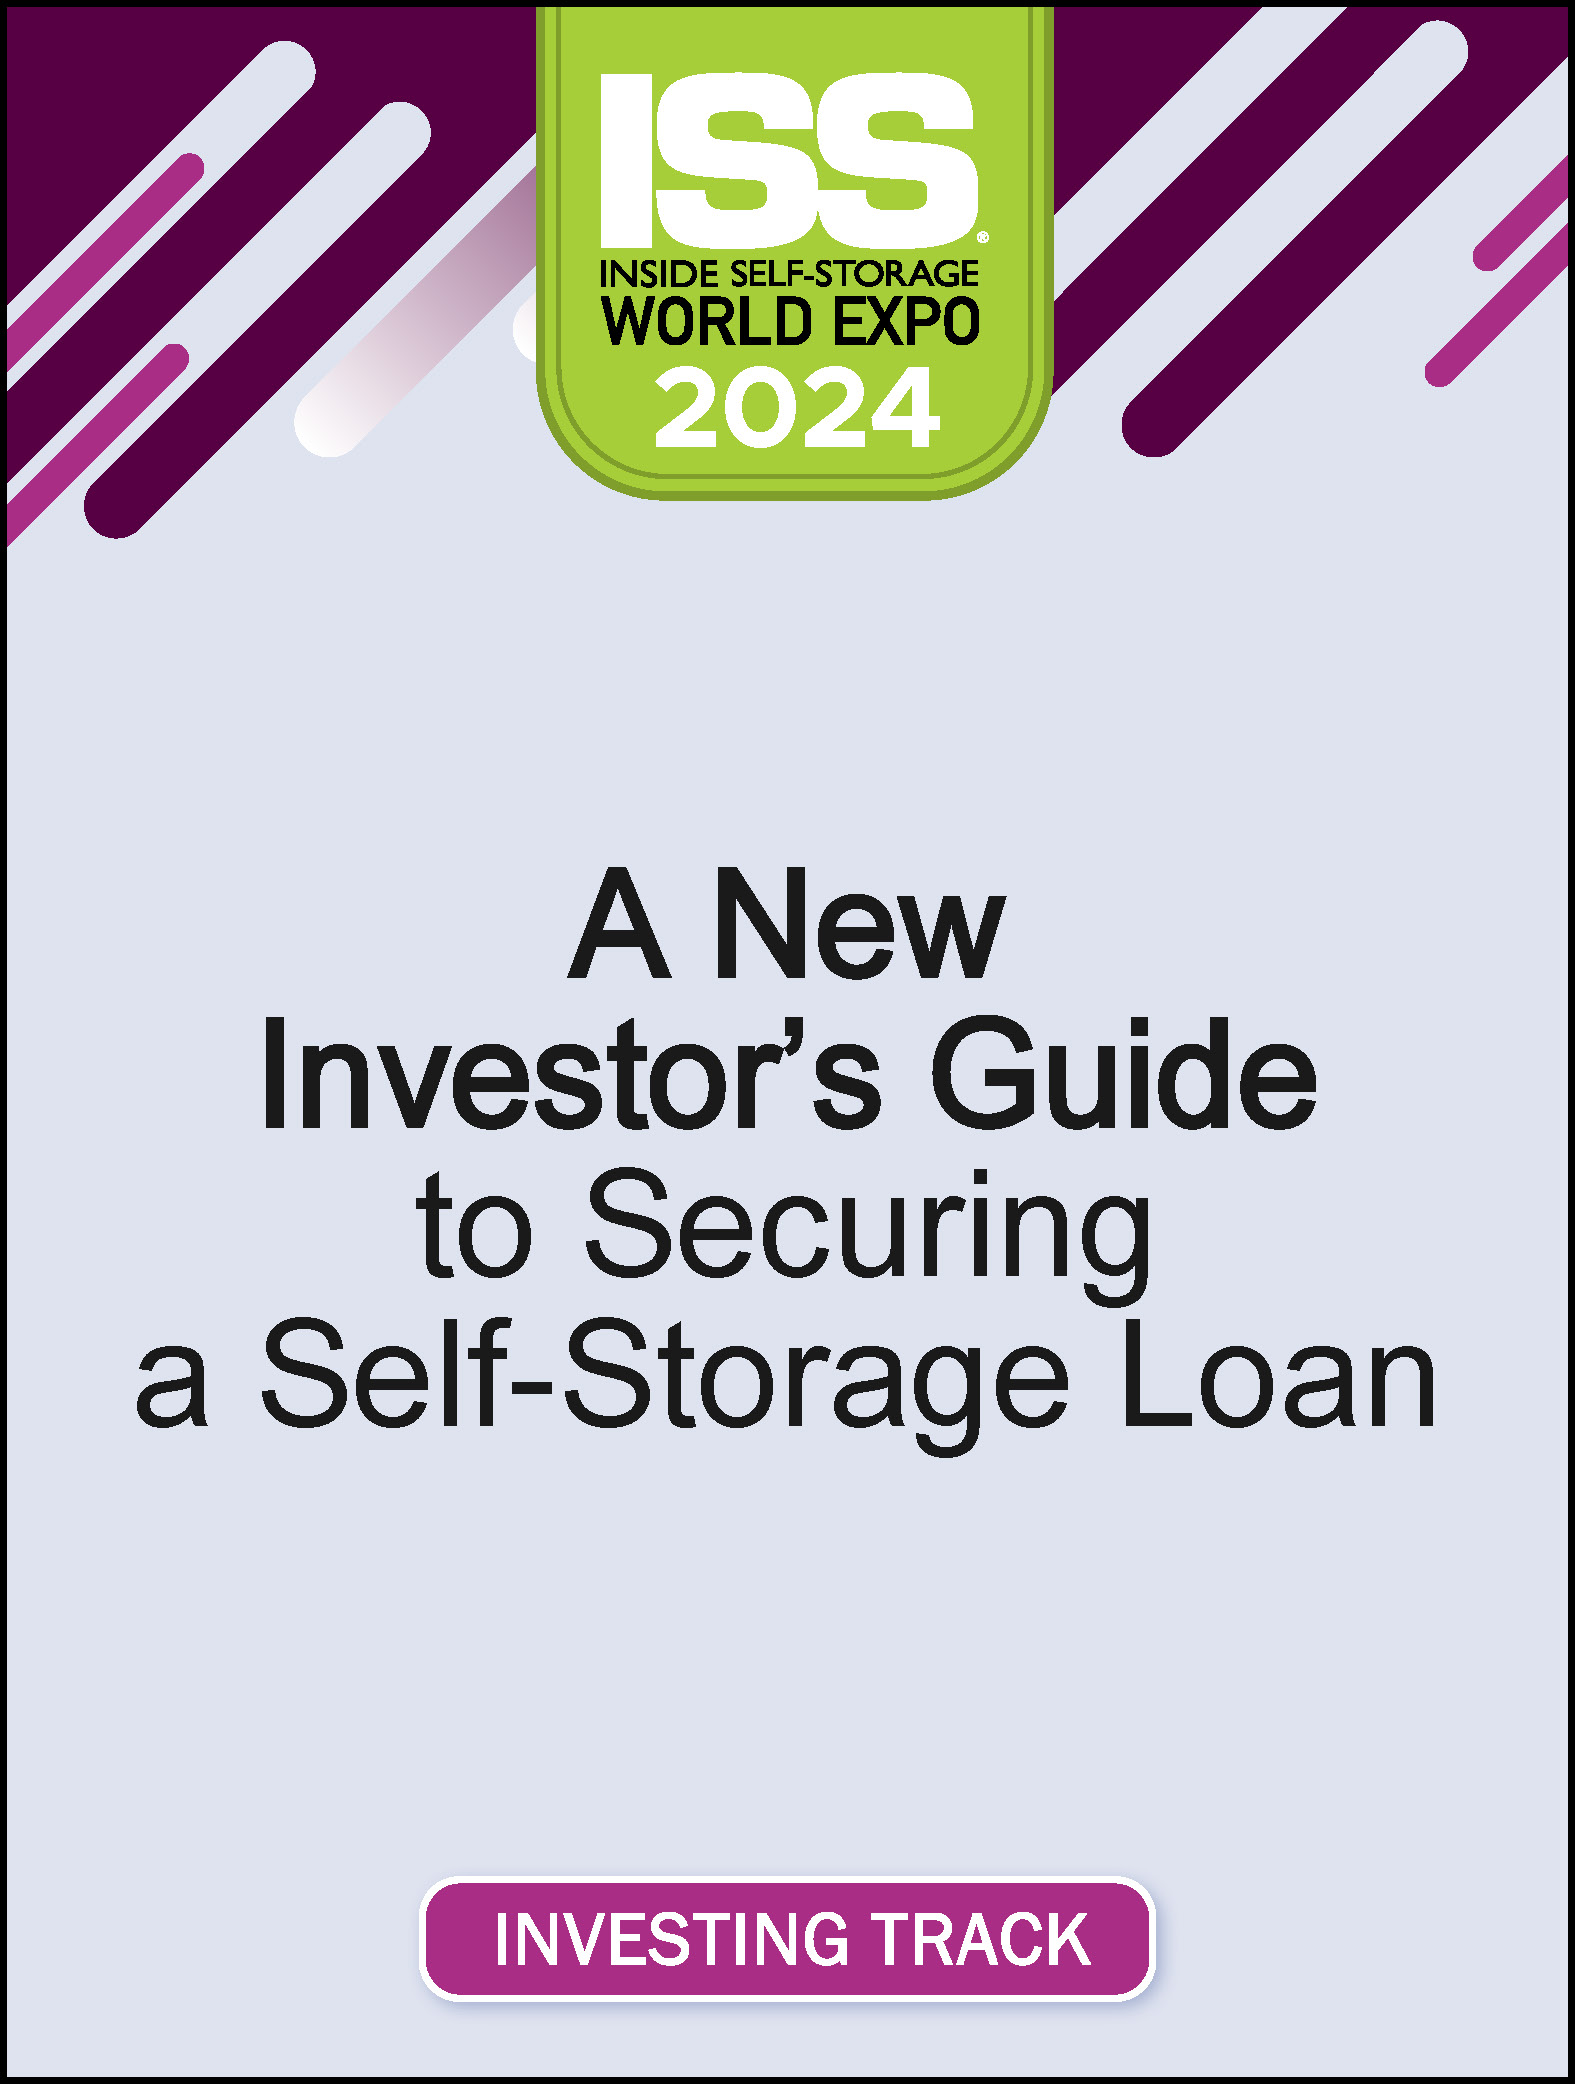 Video Pre-Order Sub - A New Investor’s Guide to Securing a Self-Storage Loan